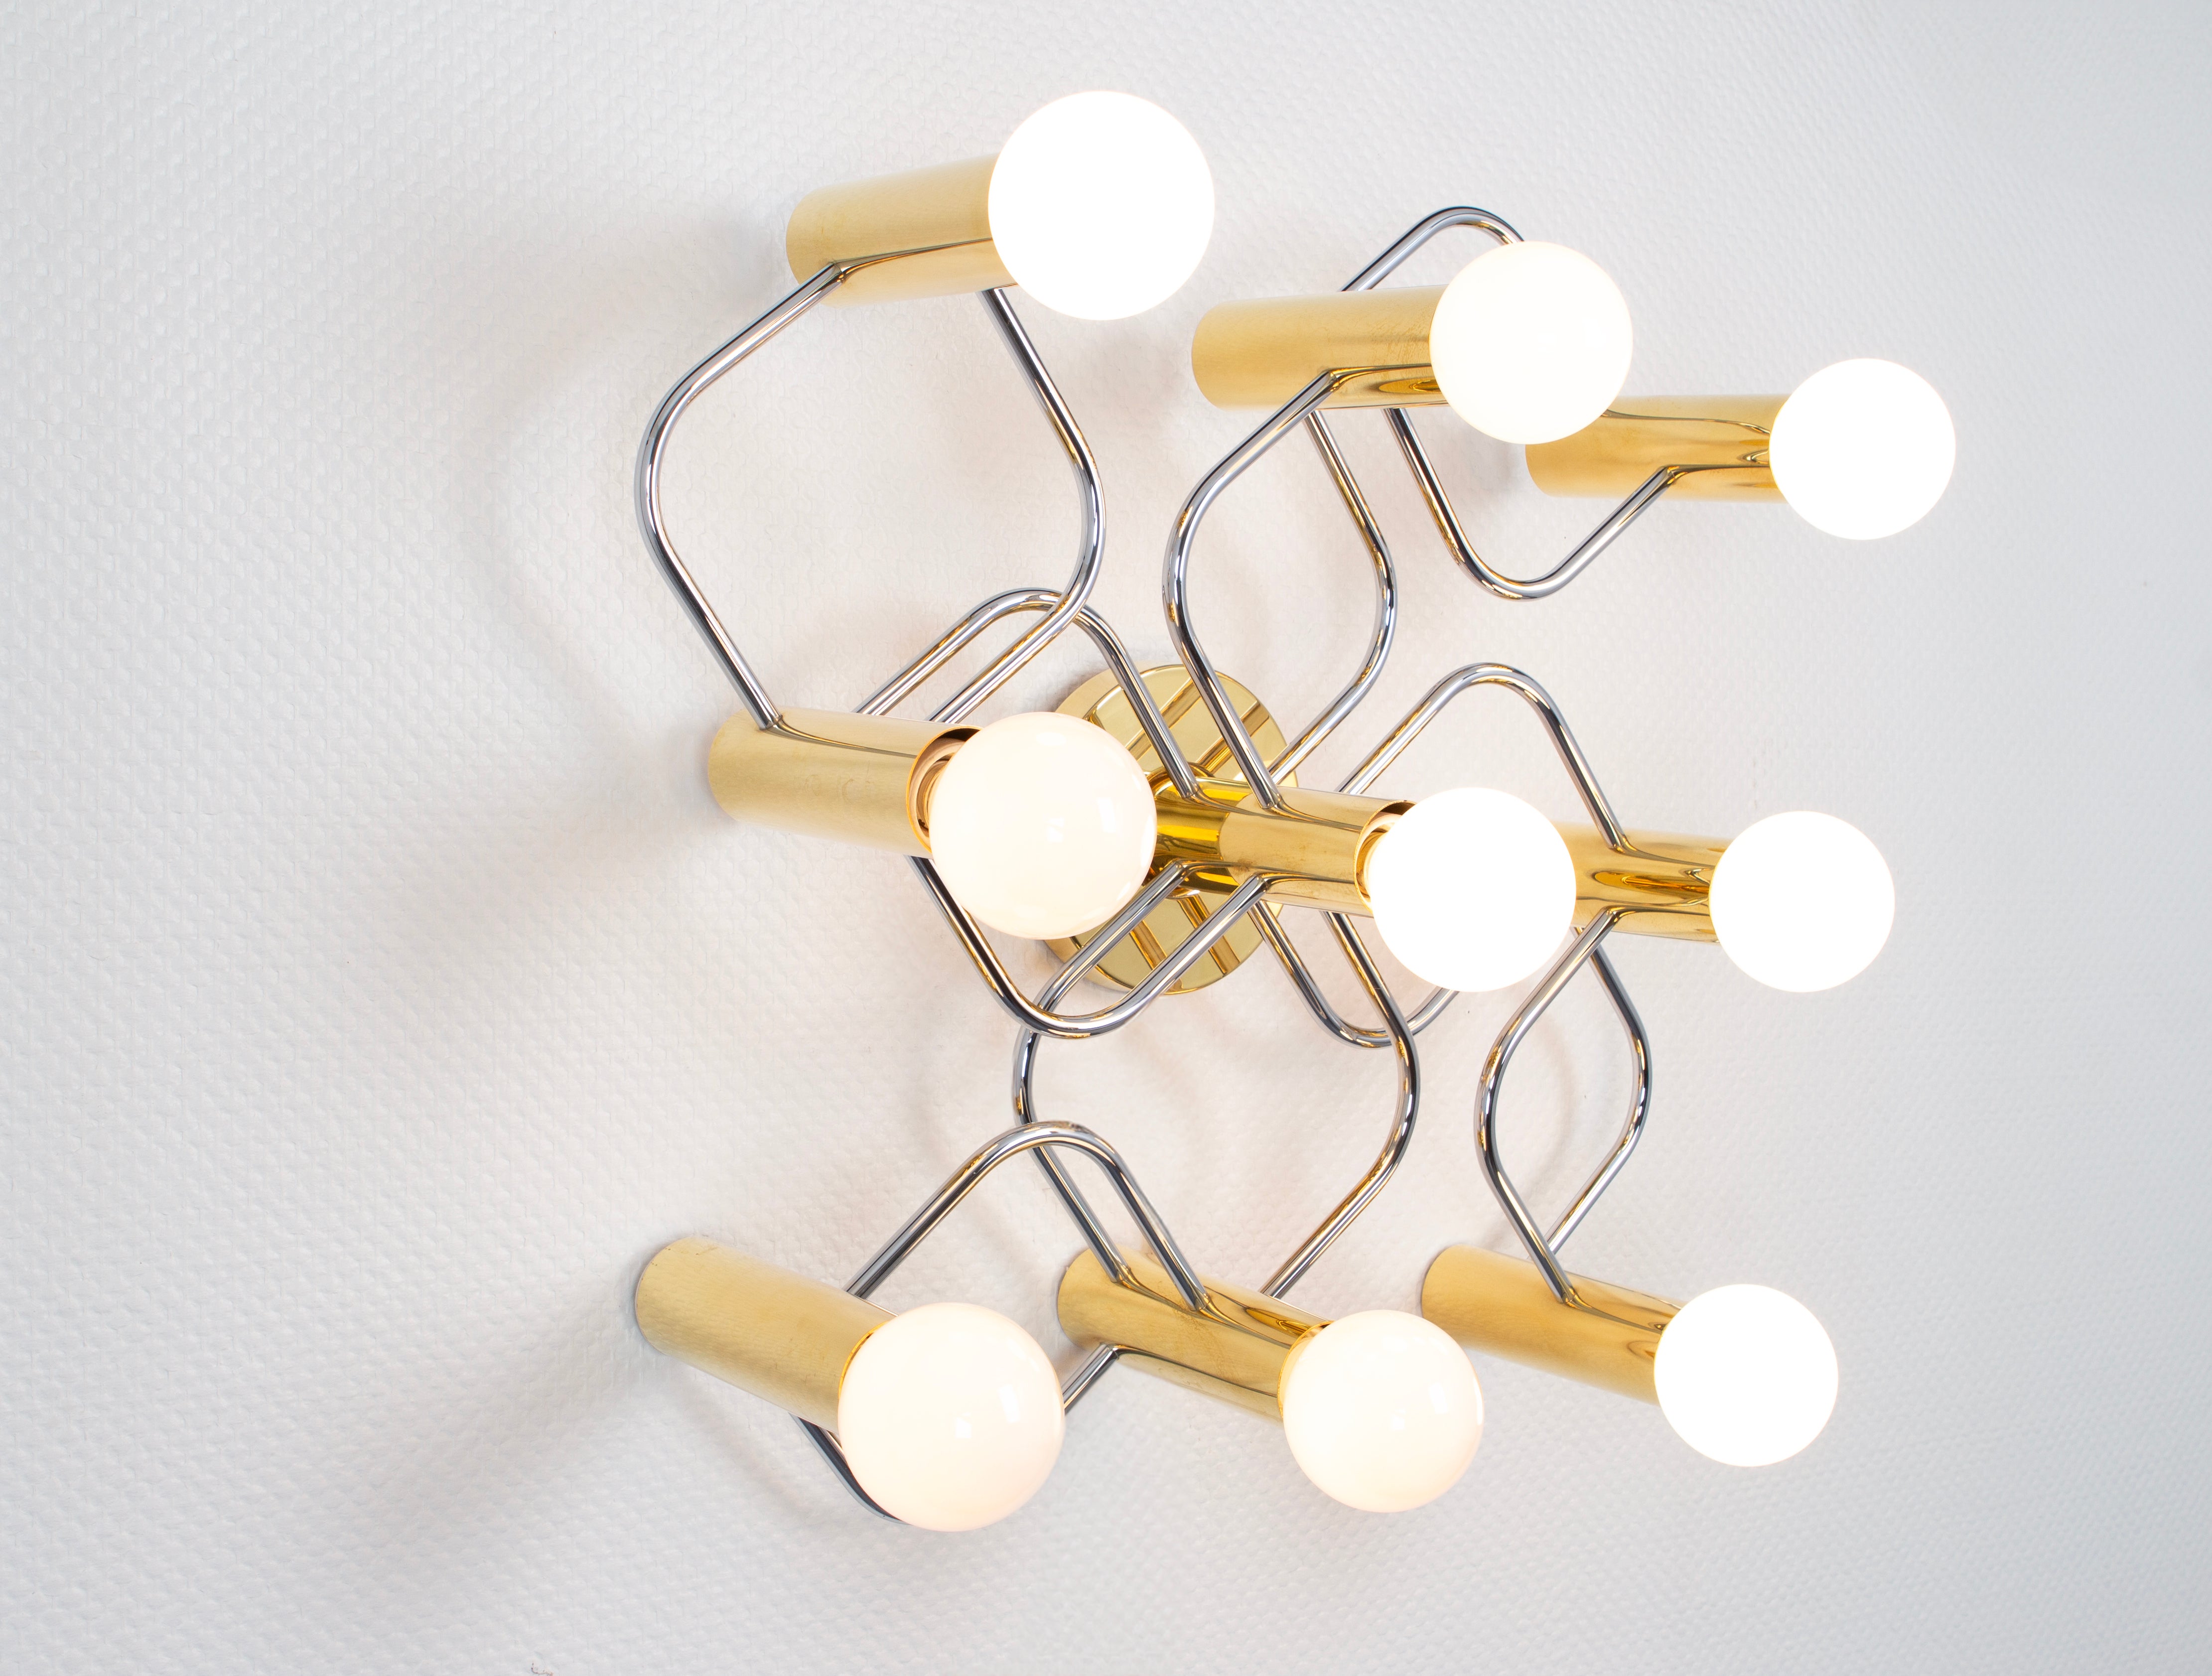 A stunning nine-light flush mount light fixture in brass and chrome can be used as a wall or ceiling light.
Design: Sciolari
Sockets: 9 x E27 Standard bulbs - max 80 watts each
Light bulbs are not included. It is possible to install this fixture in